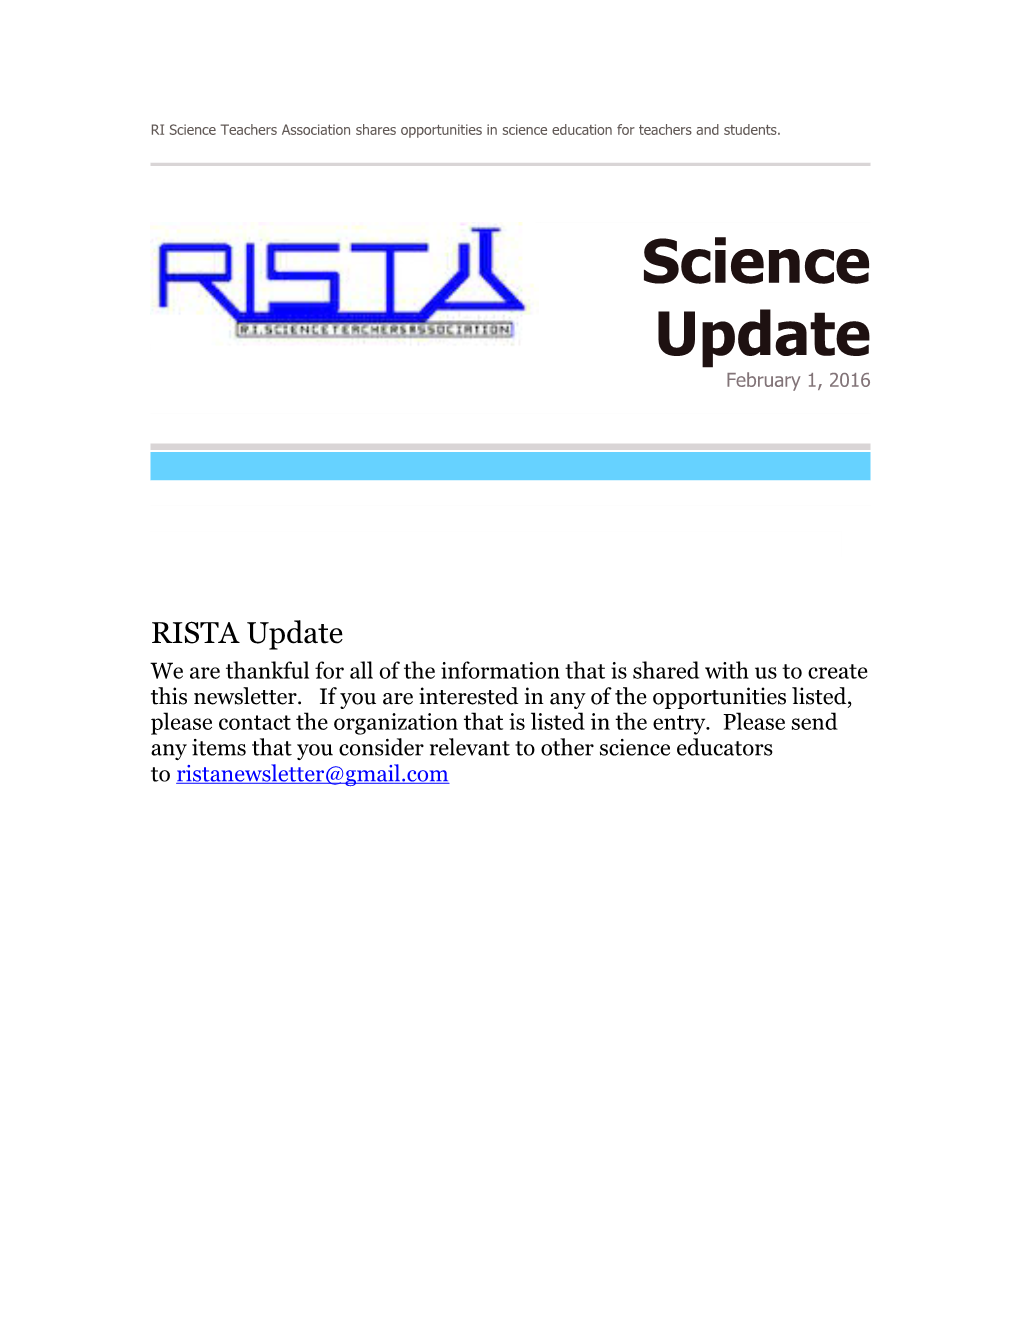 RI Science Teachersassociationshares Opportunities in Science Education for Teachers And